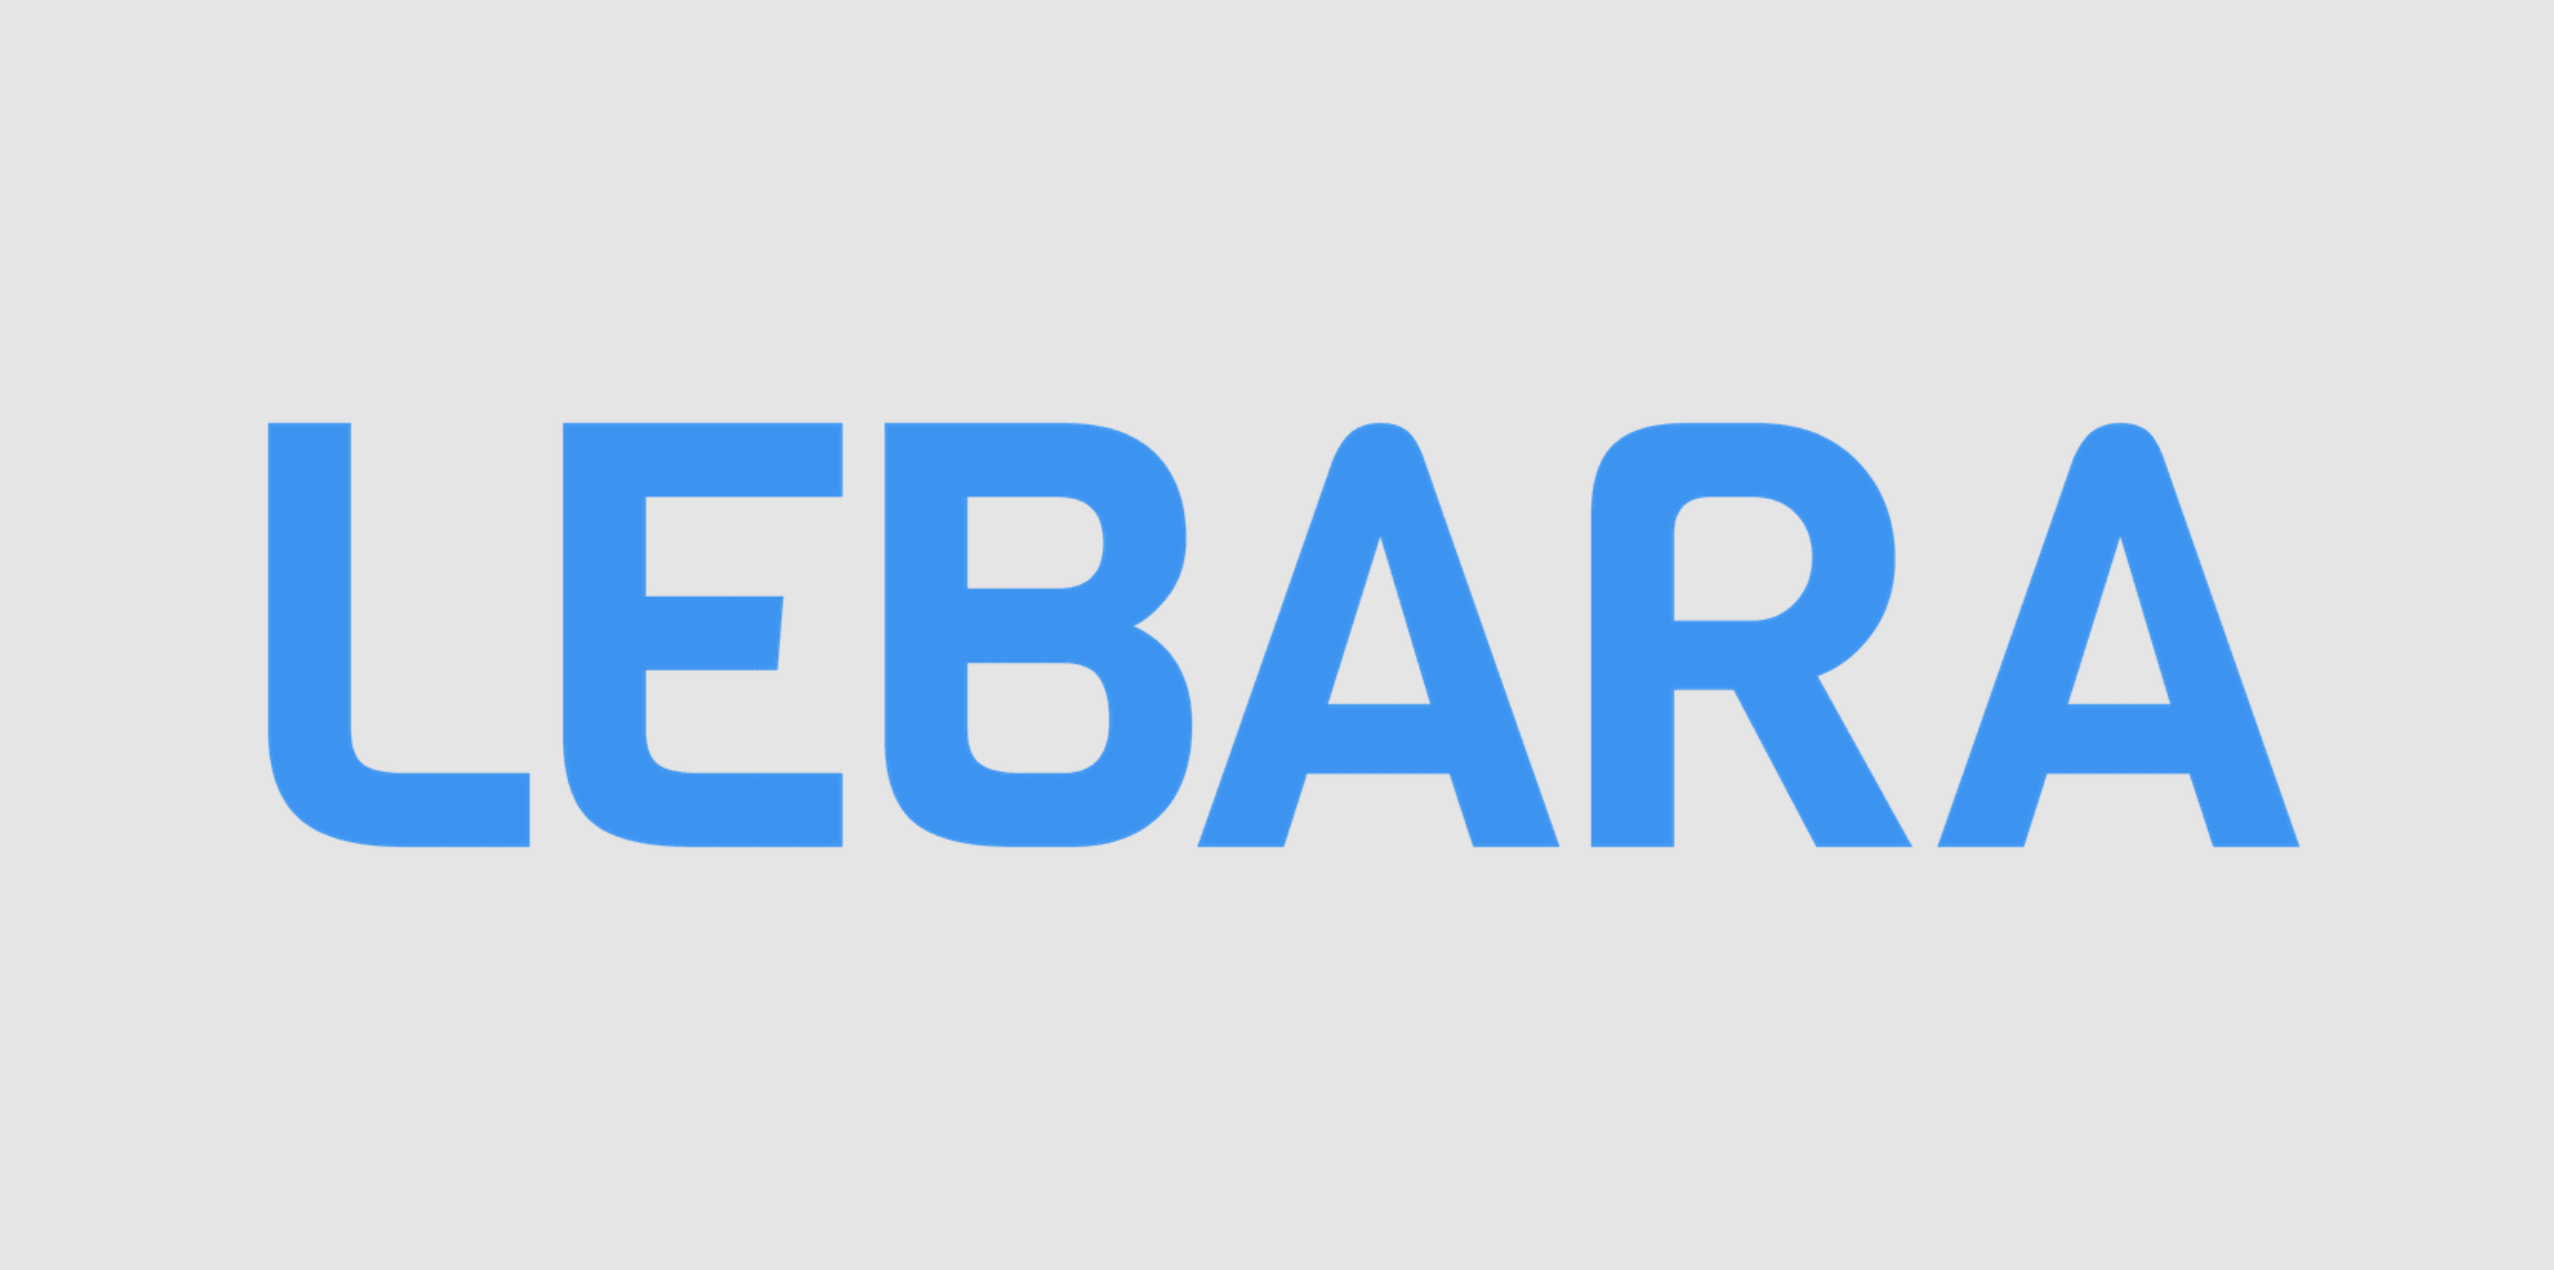 Lebara specialises in short-term contracts with bundles, including international minutes to 44 countries